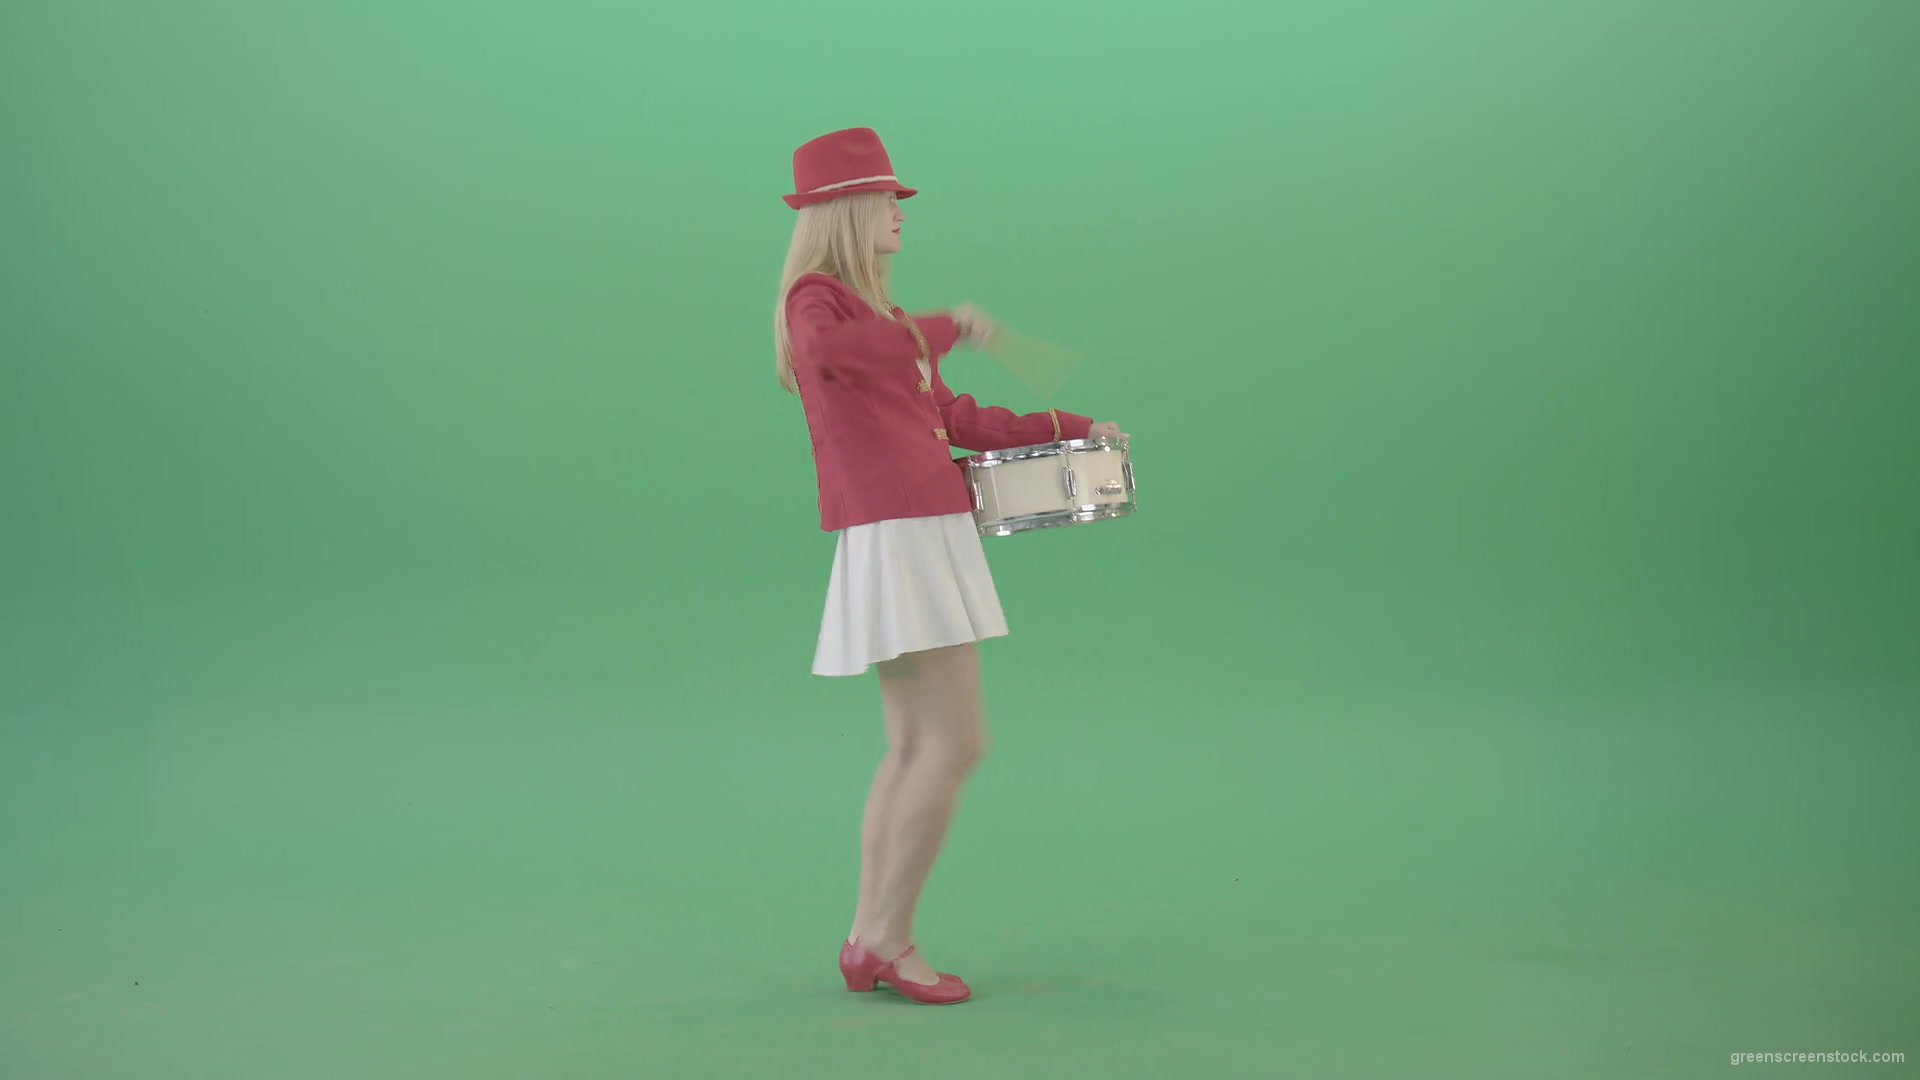 Side-view-marching-girl-play-white-snare-drum-in-red-uniform-on-green-screen-Video-Footage-1920_008 Green Screen Stock